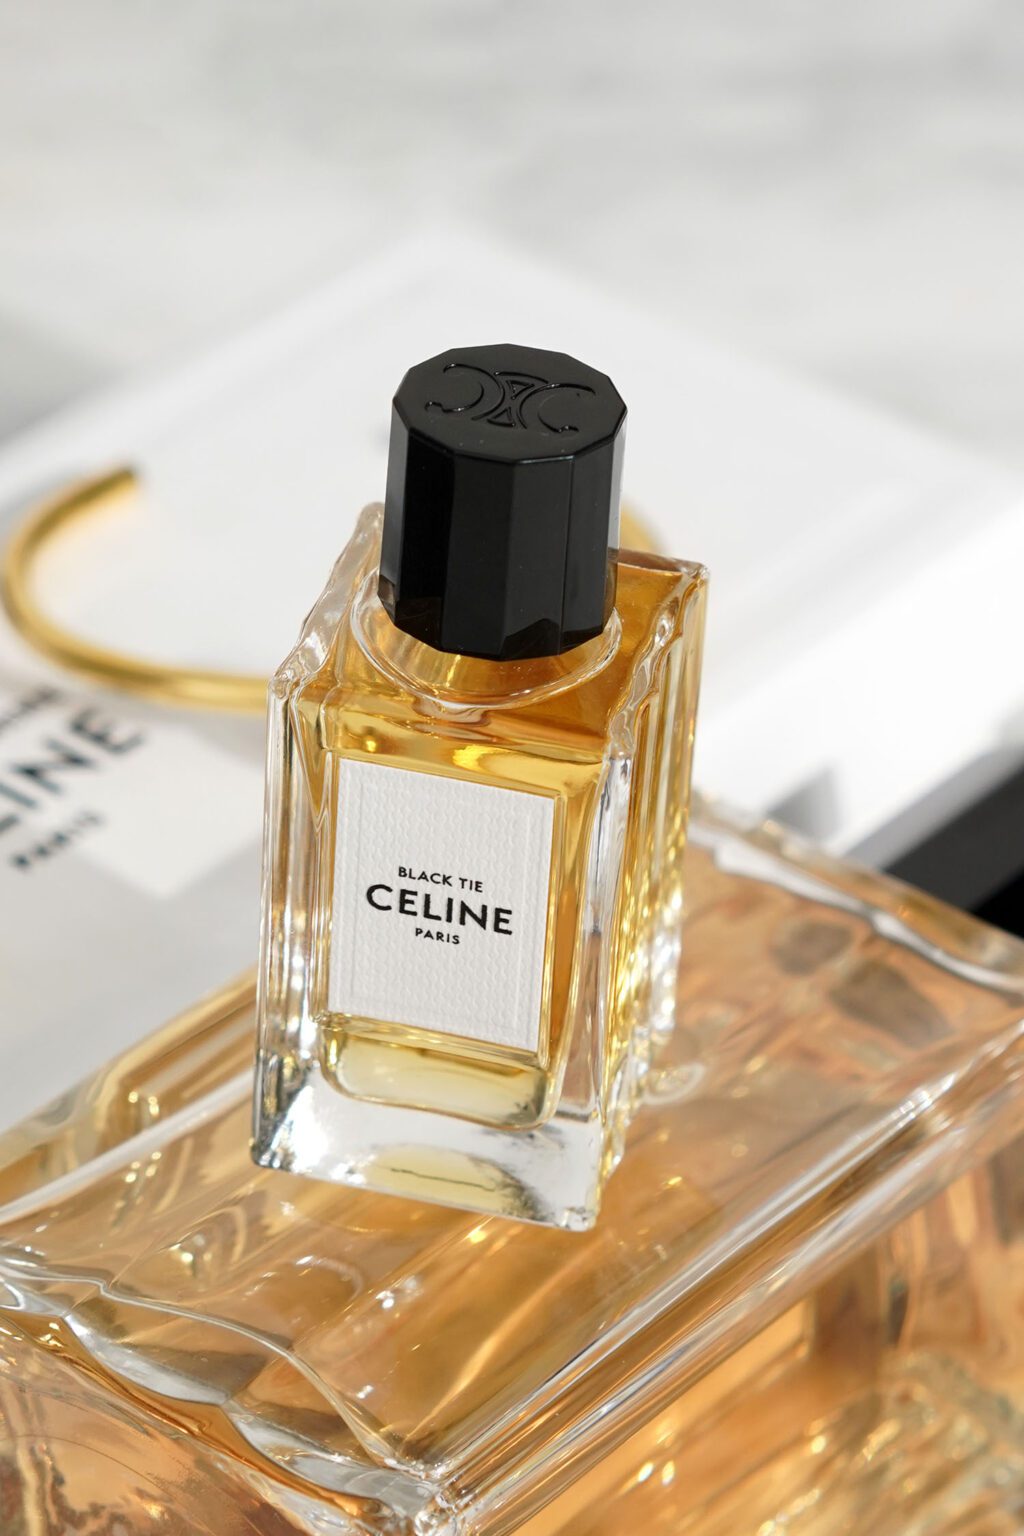 Celine Fragrance Collection Haul & Review - The Beauty Look Book